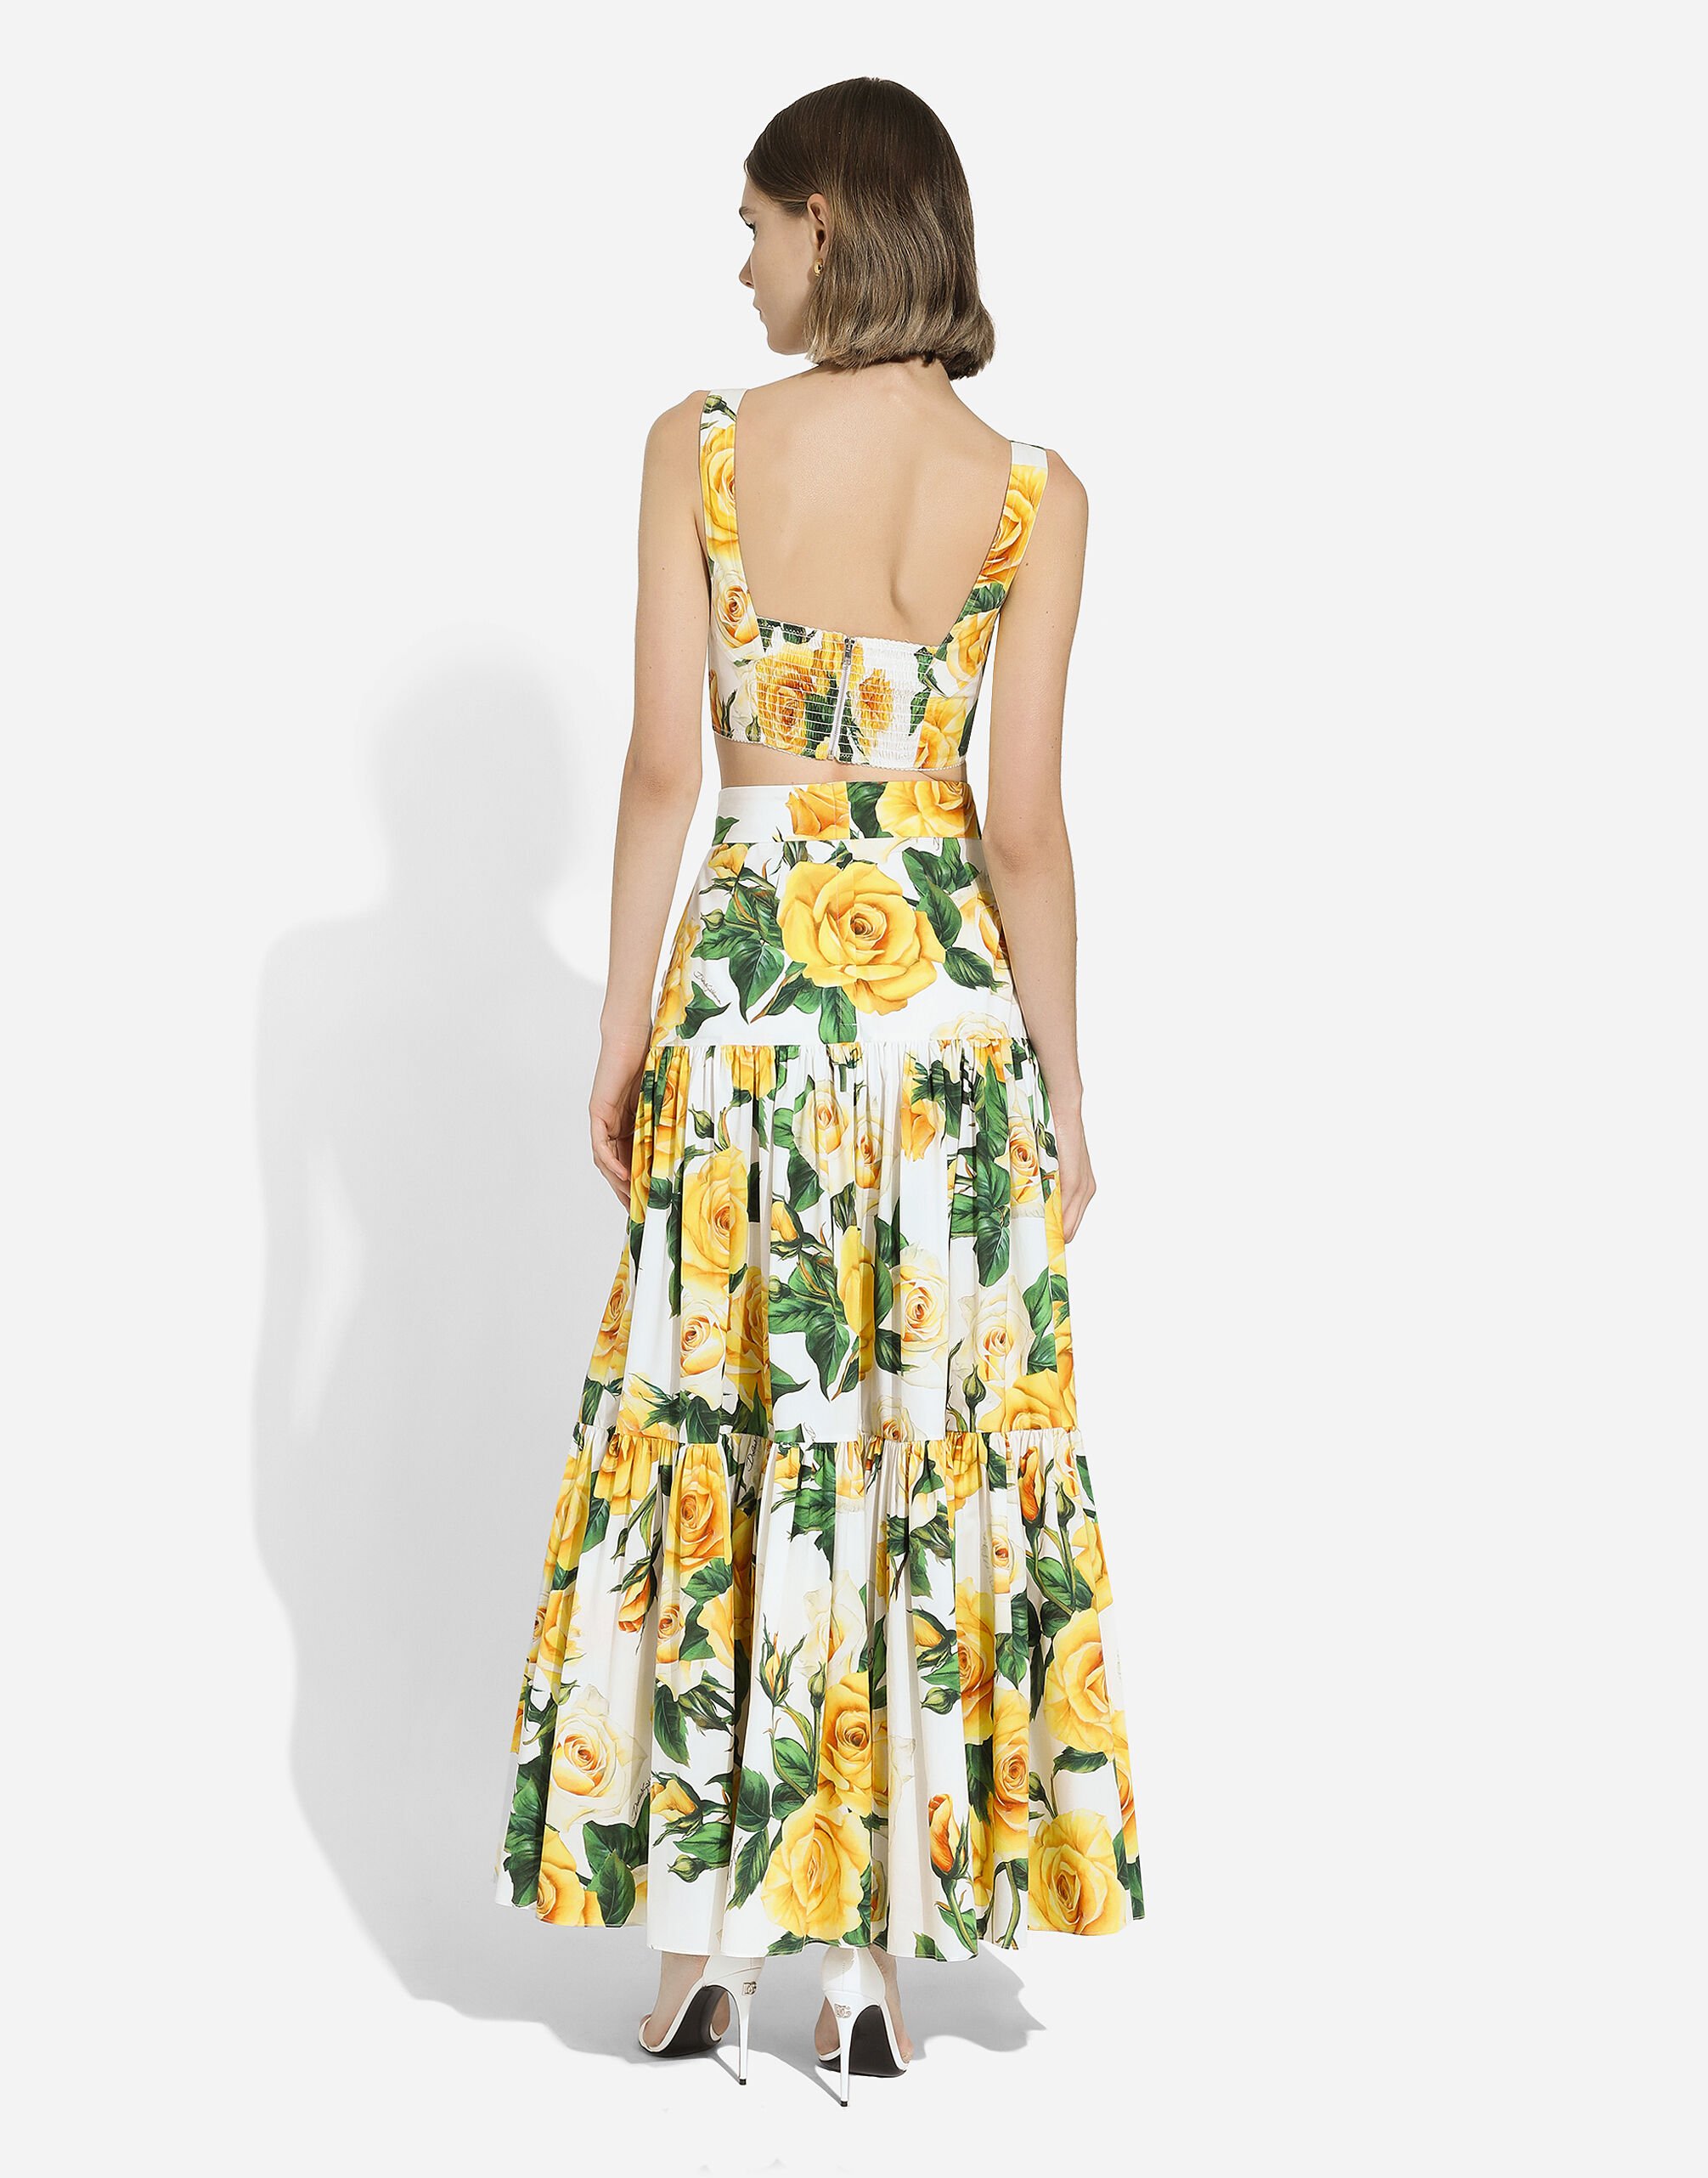 Long ruffled skirt in yellow rose-print cotton in Print for 